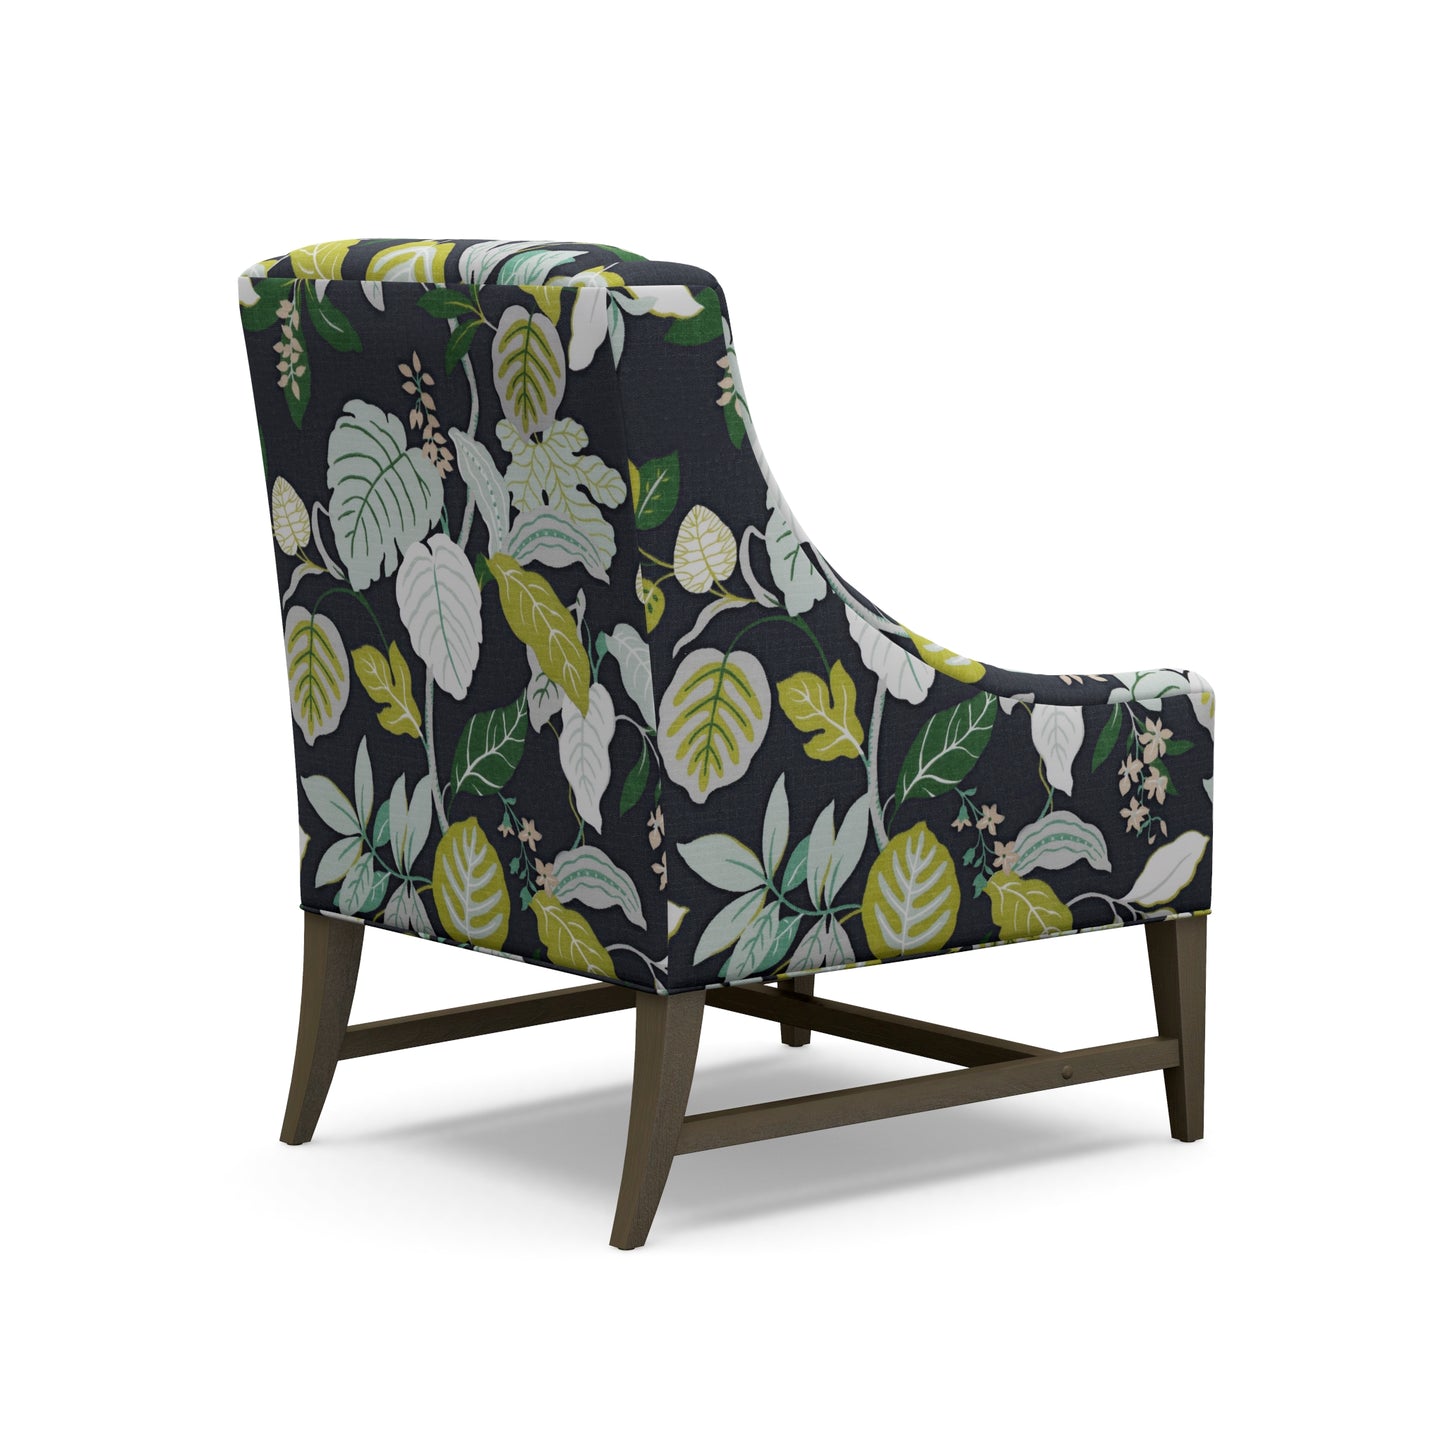 Ivy Chair